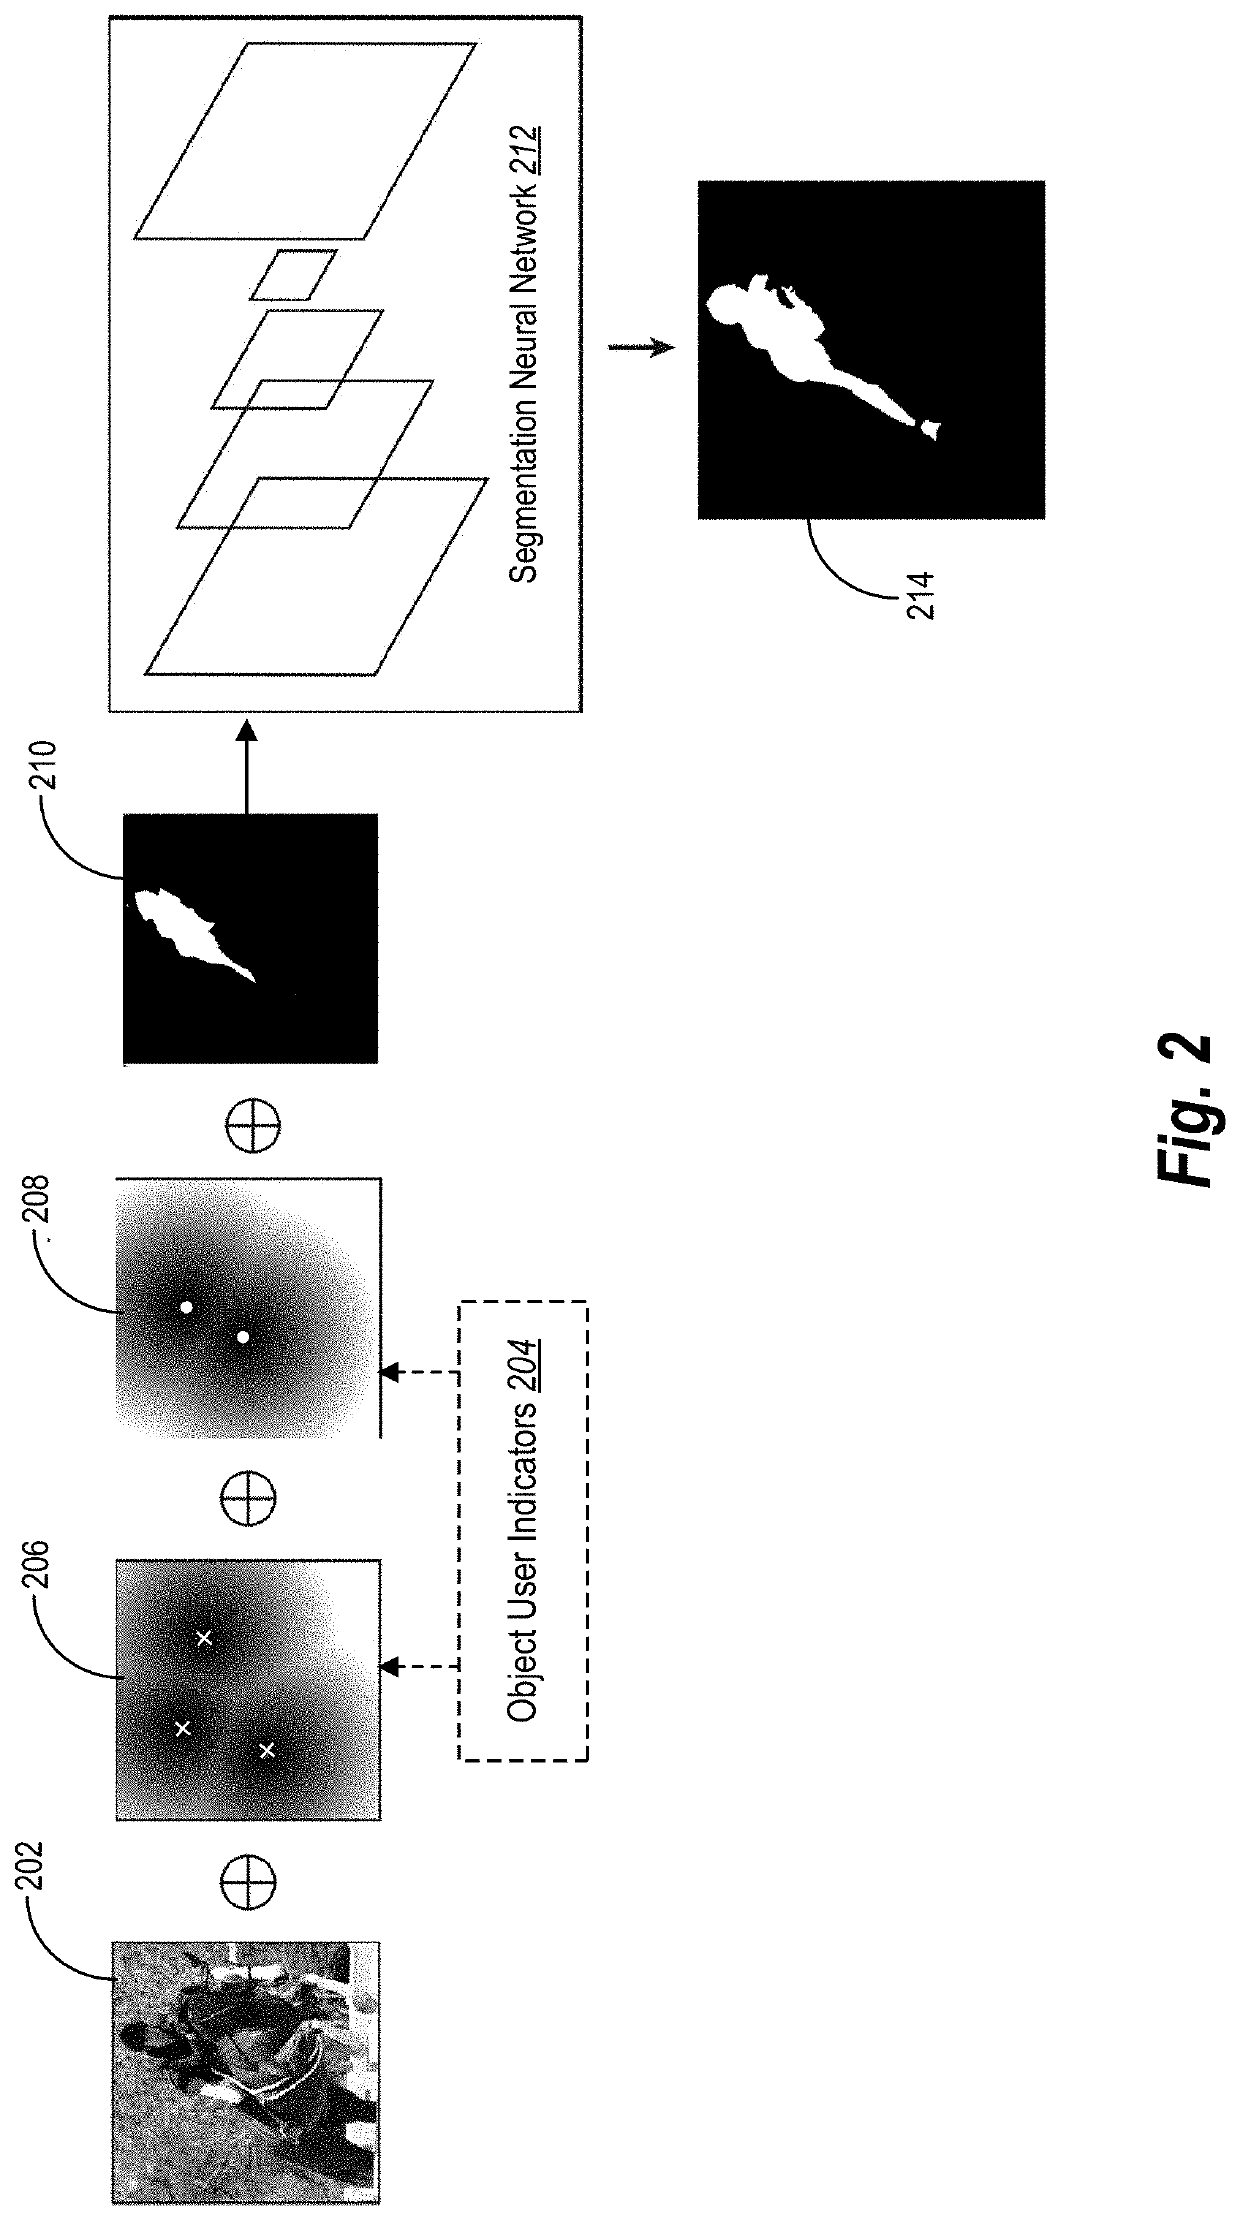 Utilizing a segmentation neural network to process initial object segmentations and object user indicators within a digital image to generate improved object segmentations